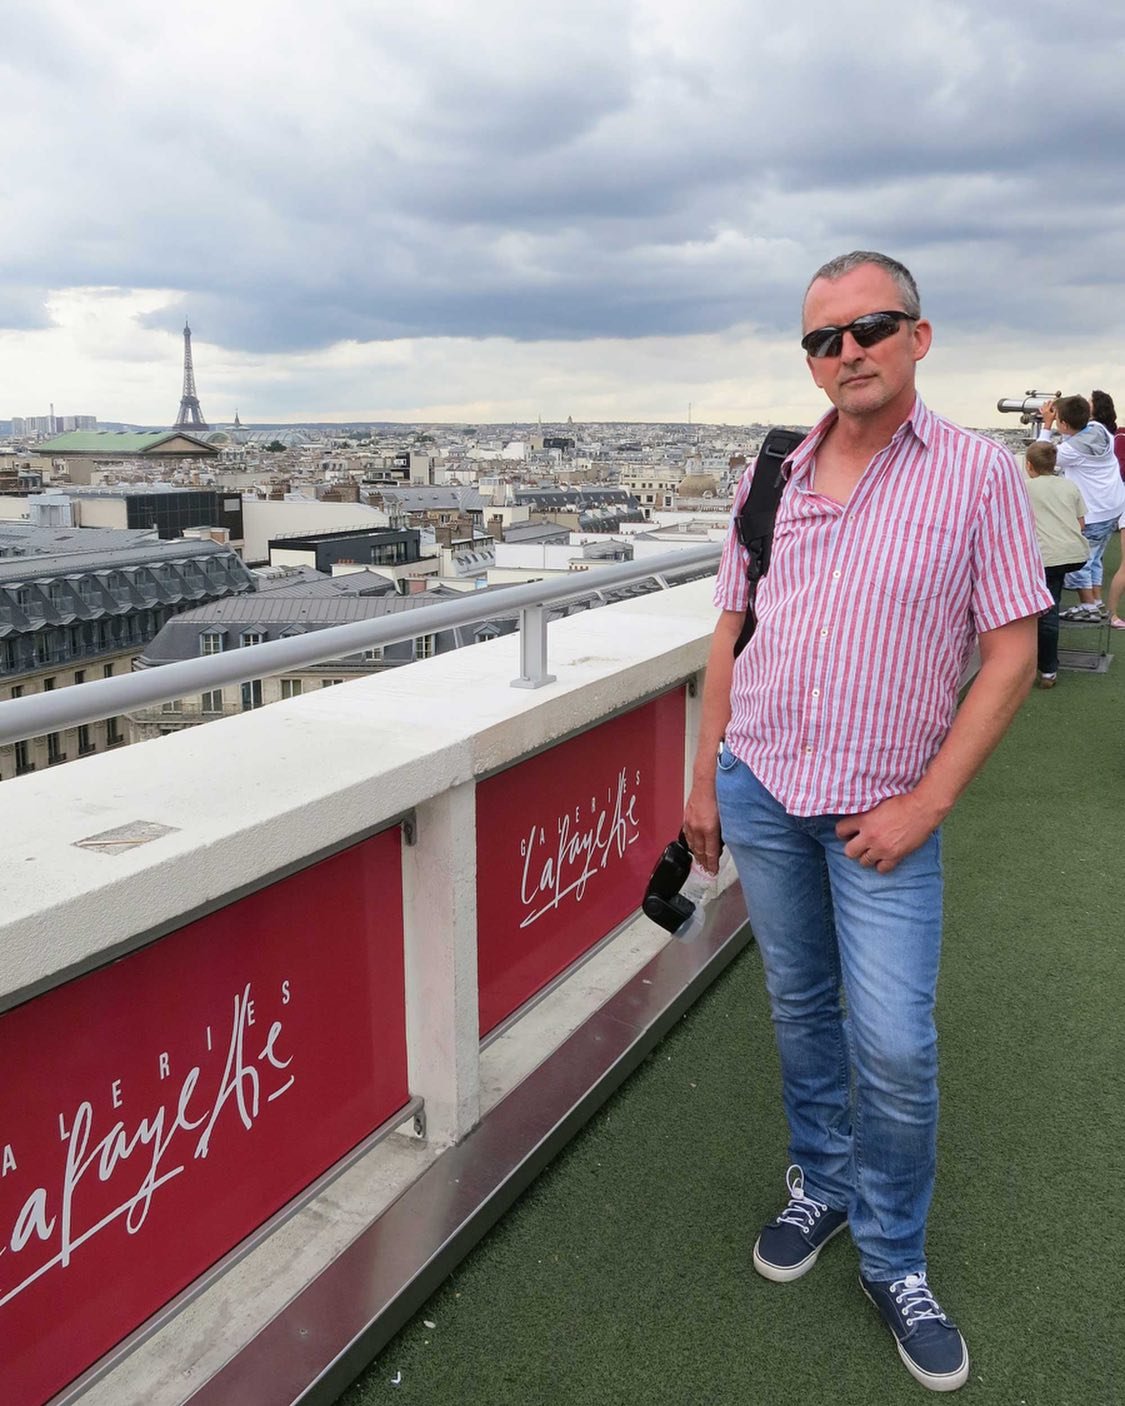 @chrishandel_photographer caught on the other side of the camera. Enjoying a wonderful view of the Parisian rooftops and the Eiffel Tower. Following an afternoon fashion show in @galerieslafayette Haussmann we headed to the rooftop for the view. Rese